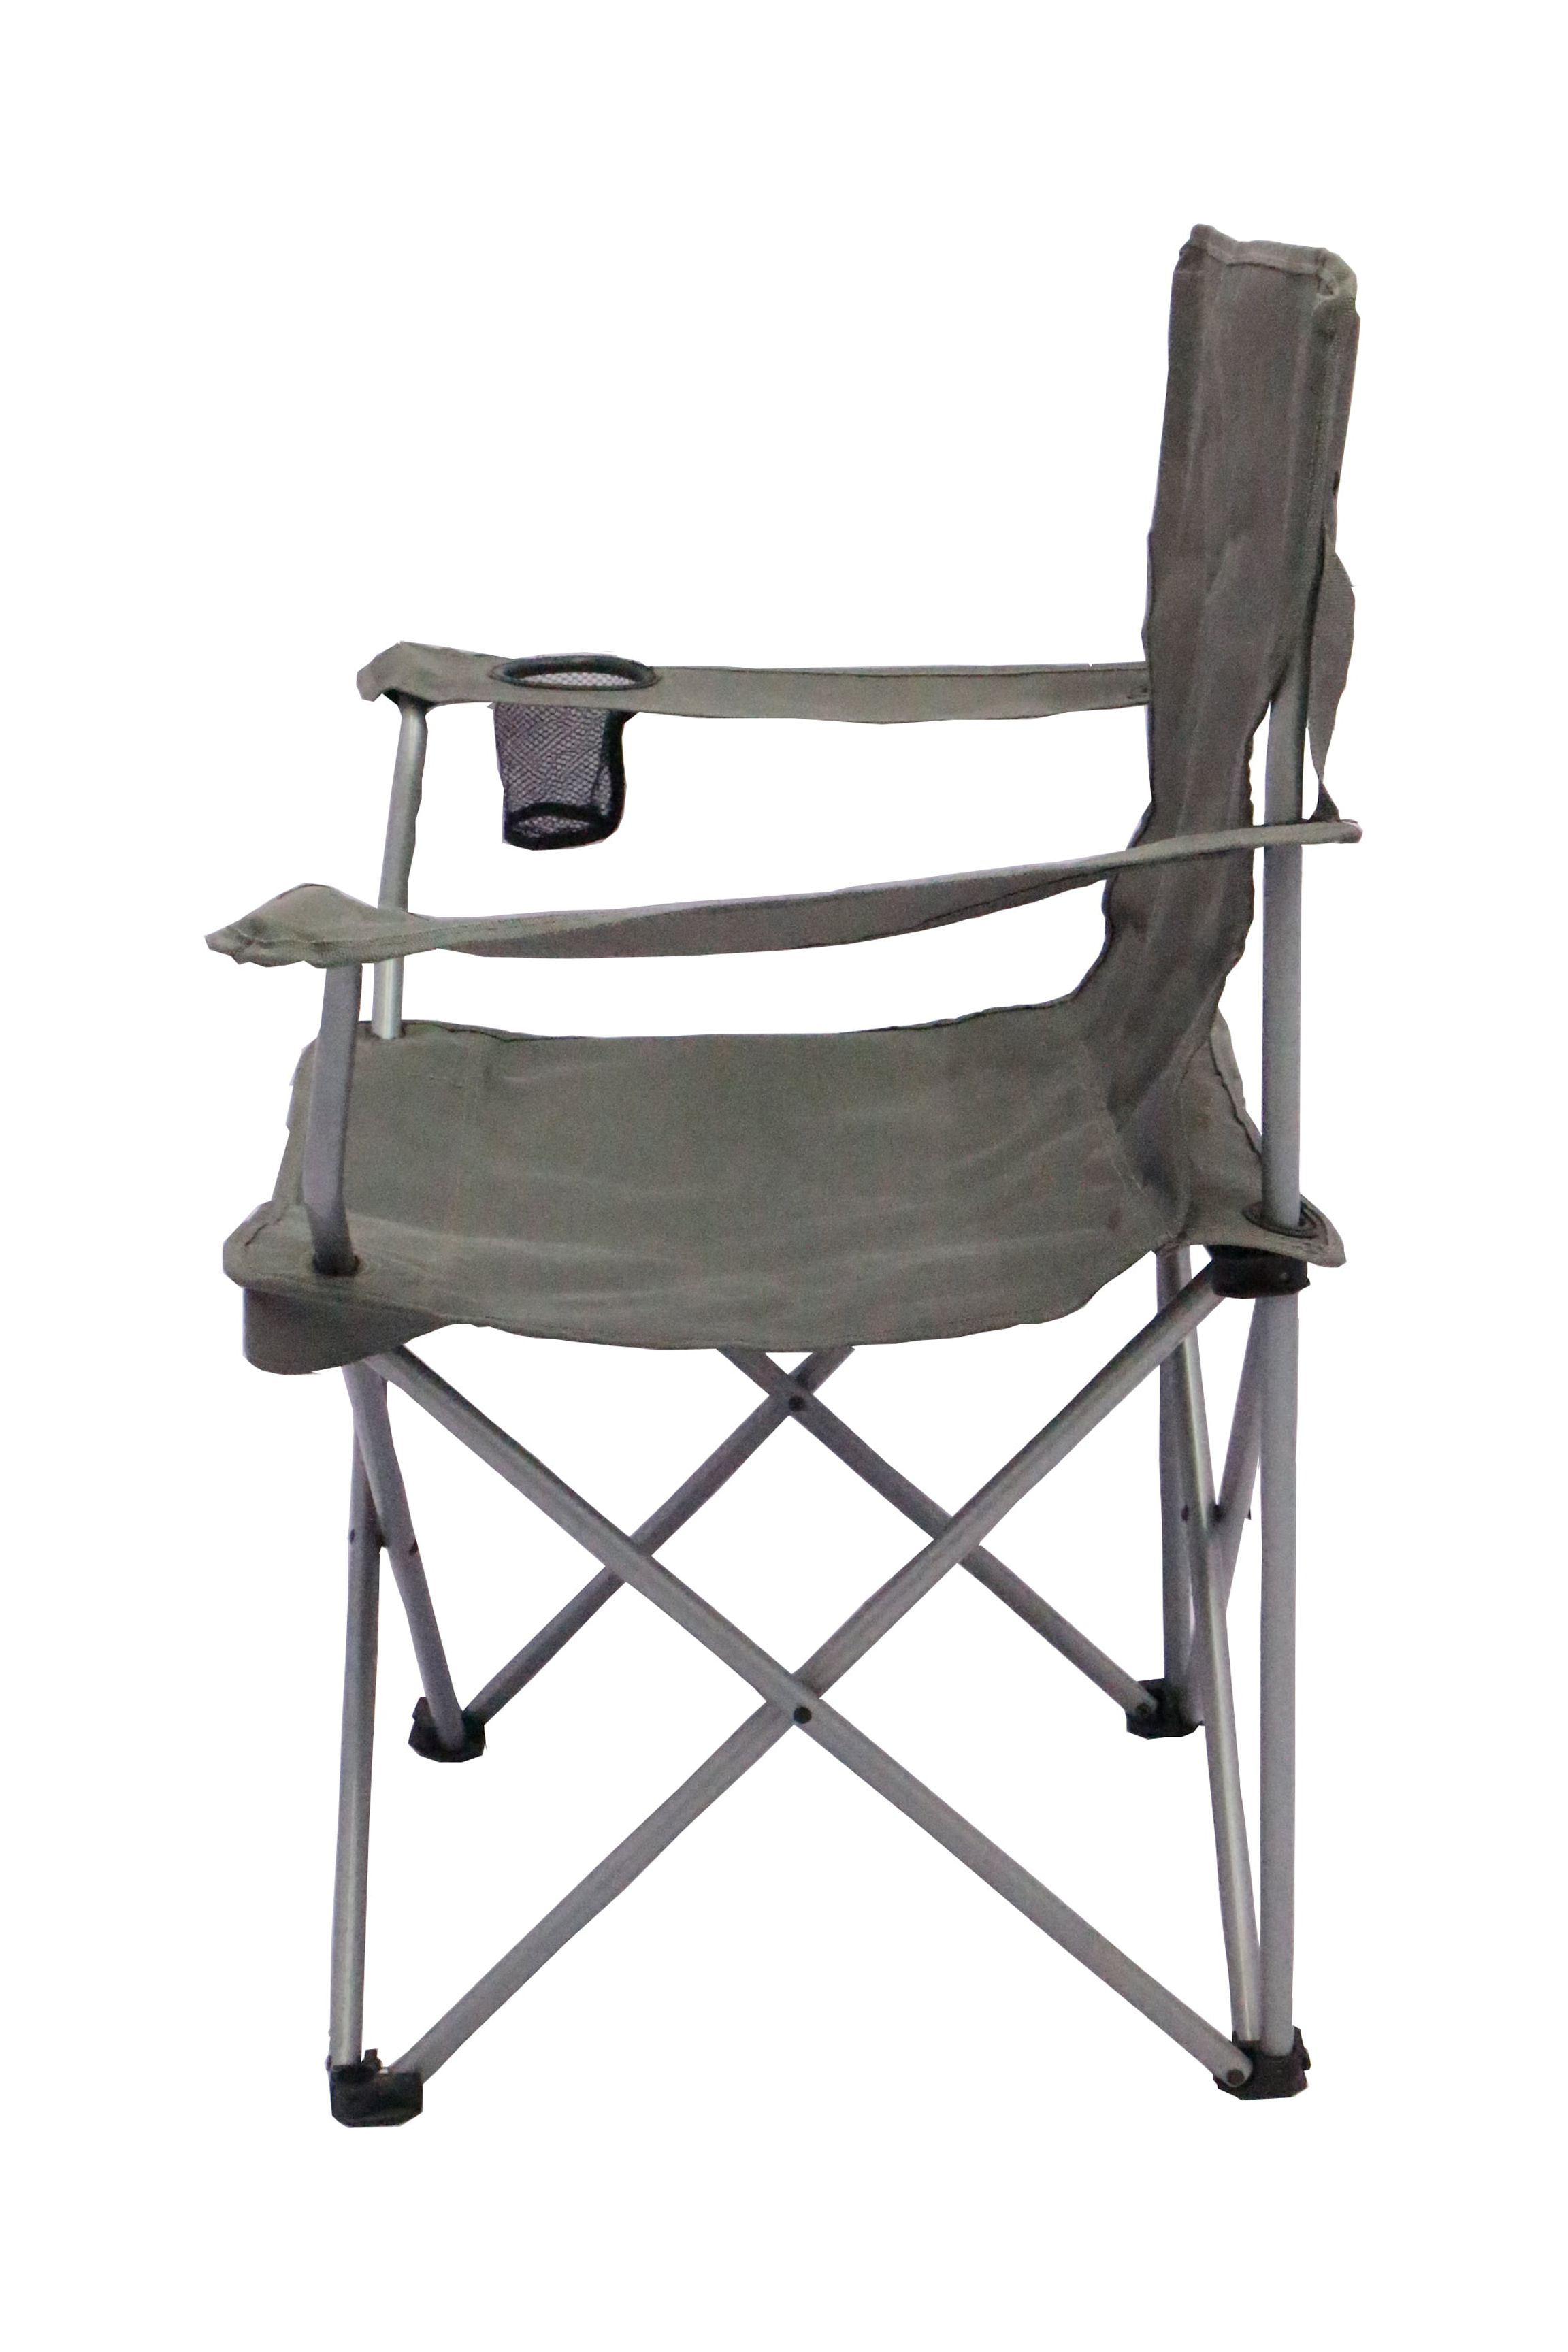 Ozark Trail Quad Folding Camp Chair 2 Pack,with Mesh Cup Holder - image 7 of 17